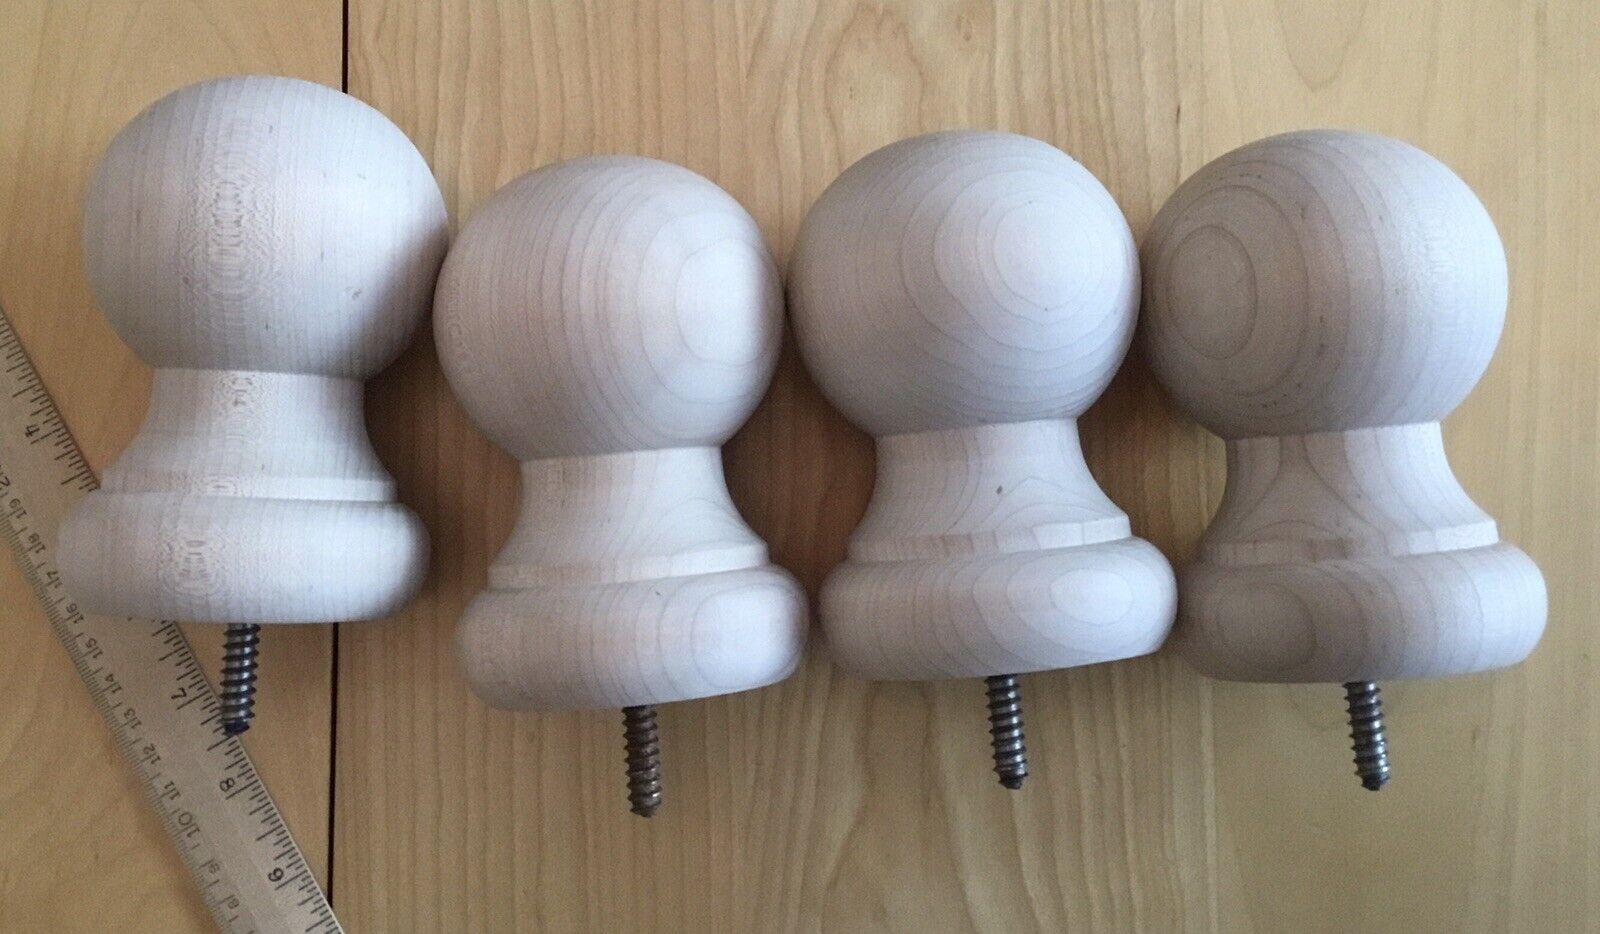 Set Of 4 New Rock Maple, Ball Furniture Feet Or Finials Unfinished,classic Size